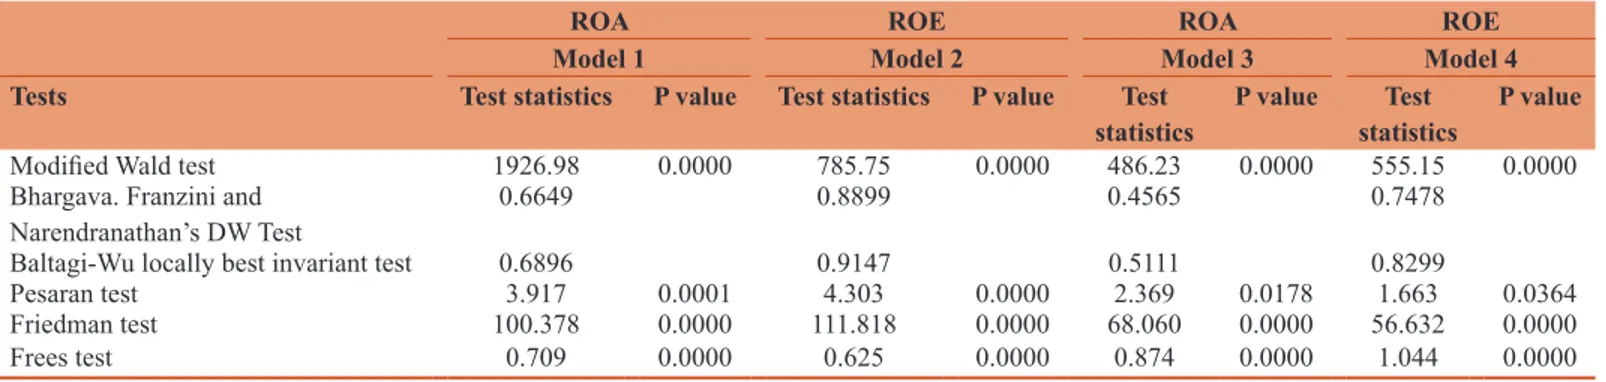 Table 9: The results of regression equations with driscroll‑kraay standard errors